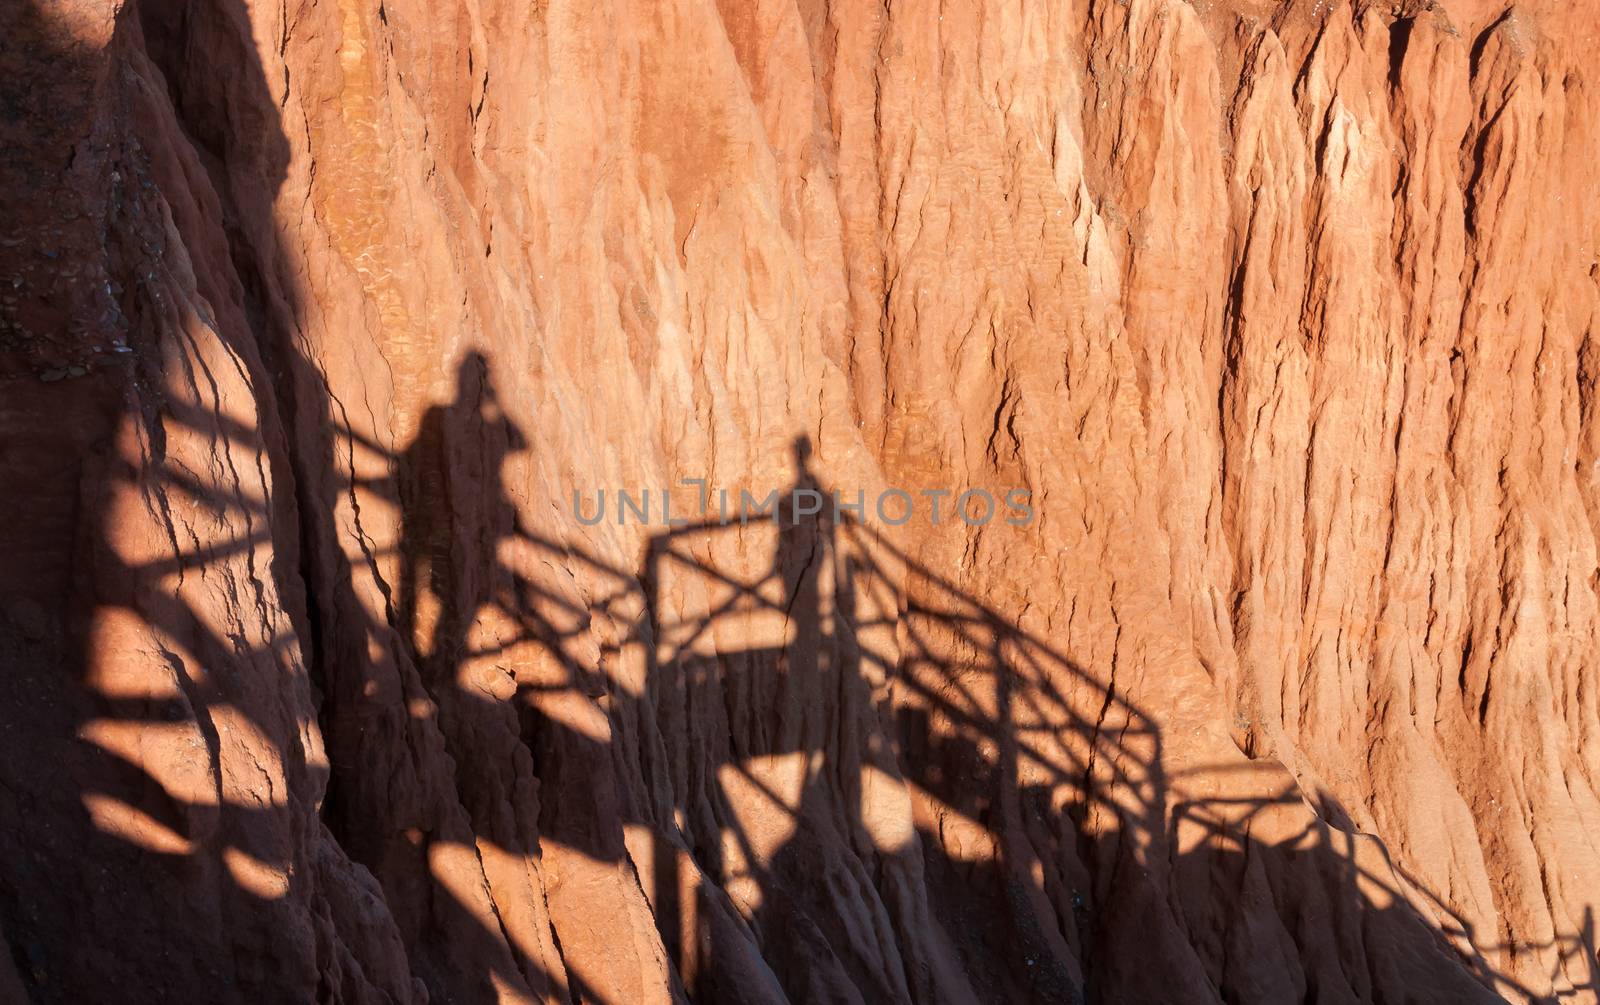 Shadows of people taking pictures on the cliffs